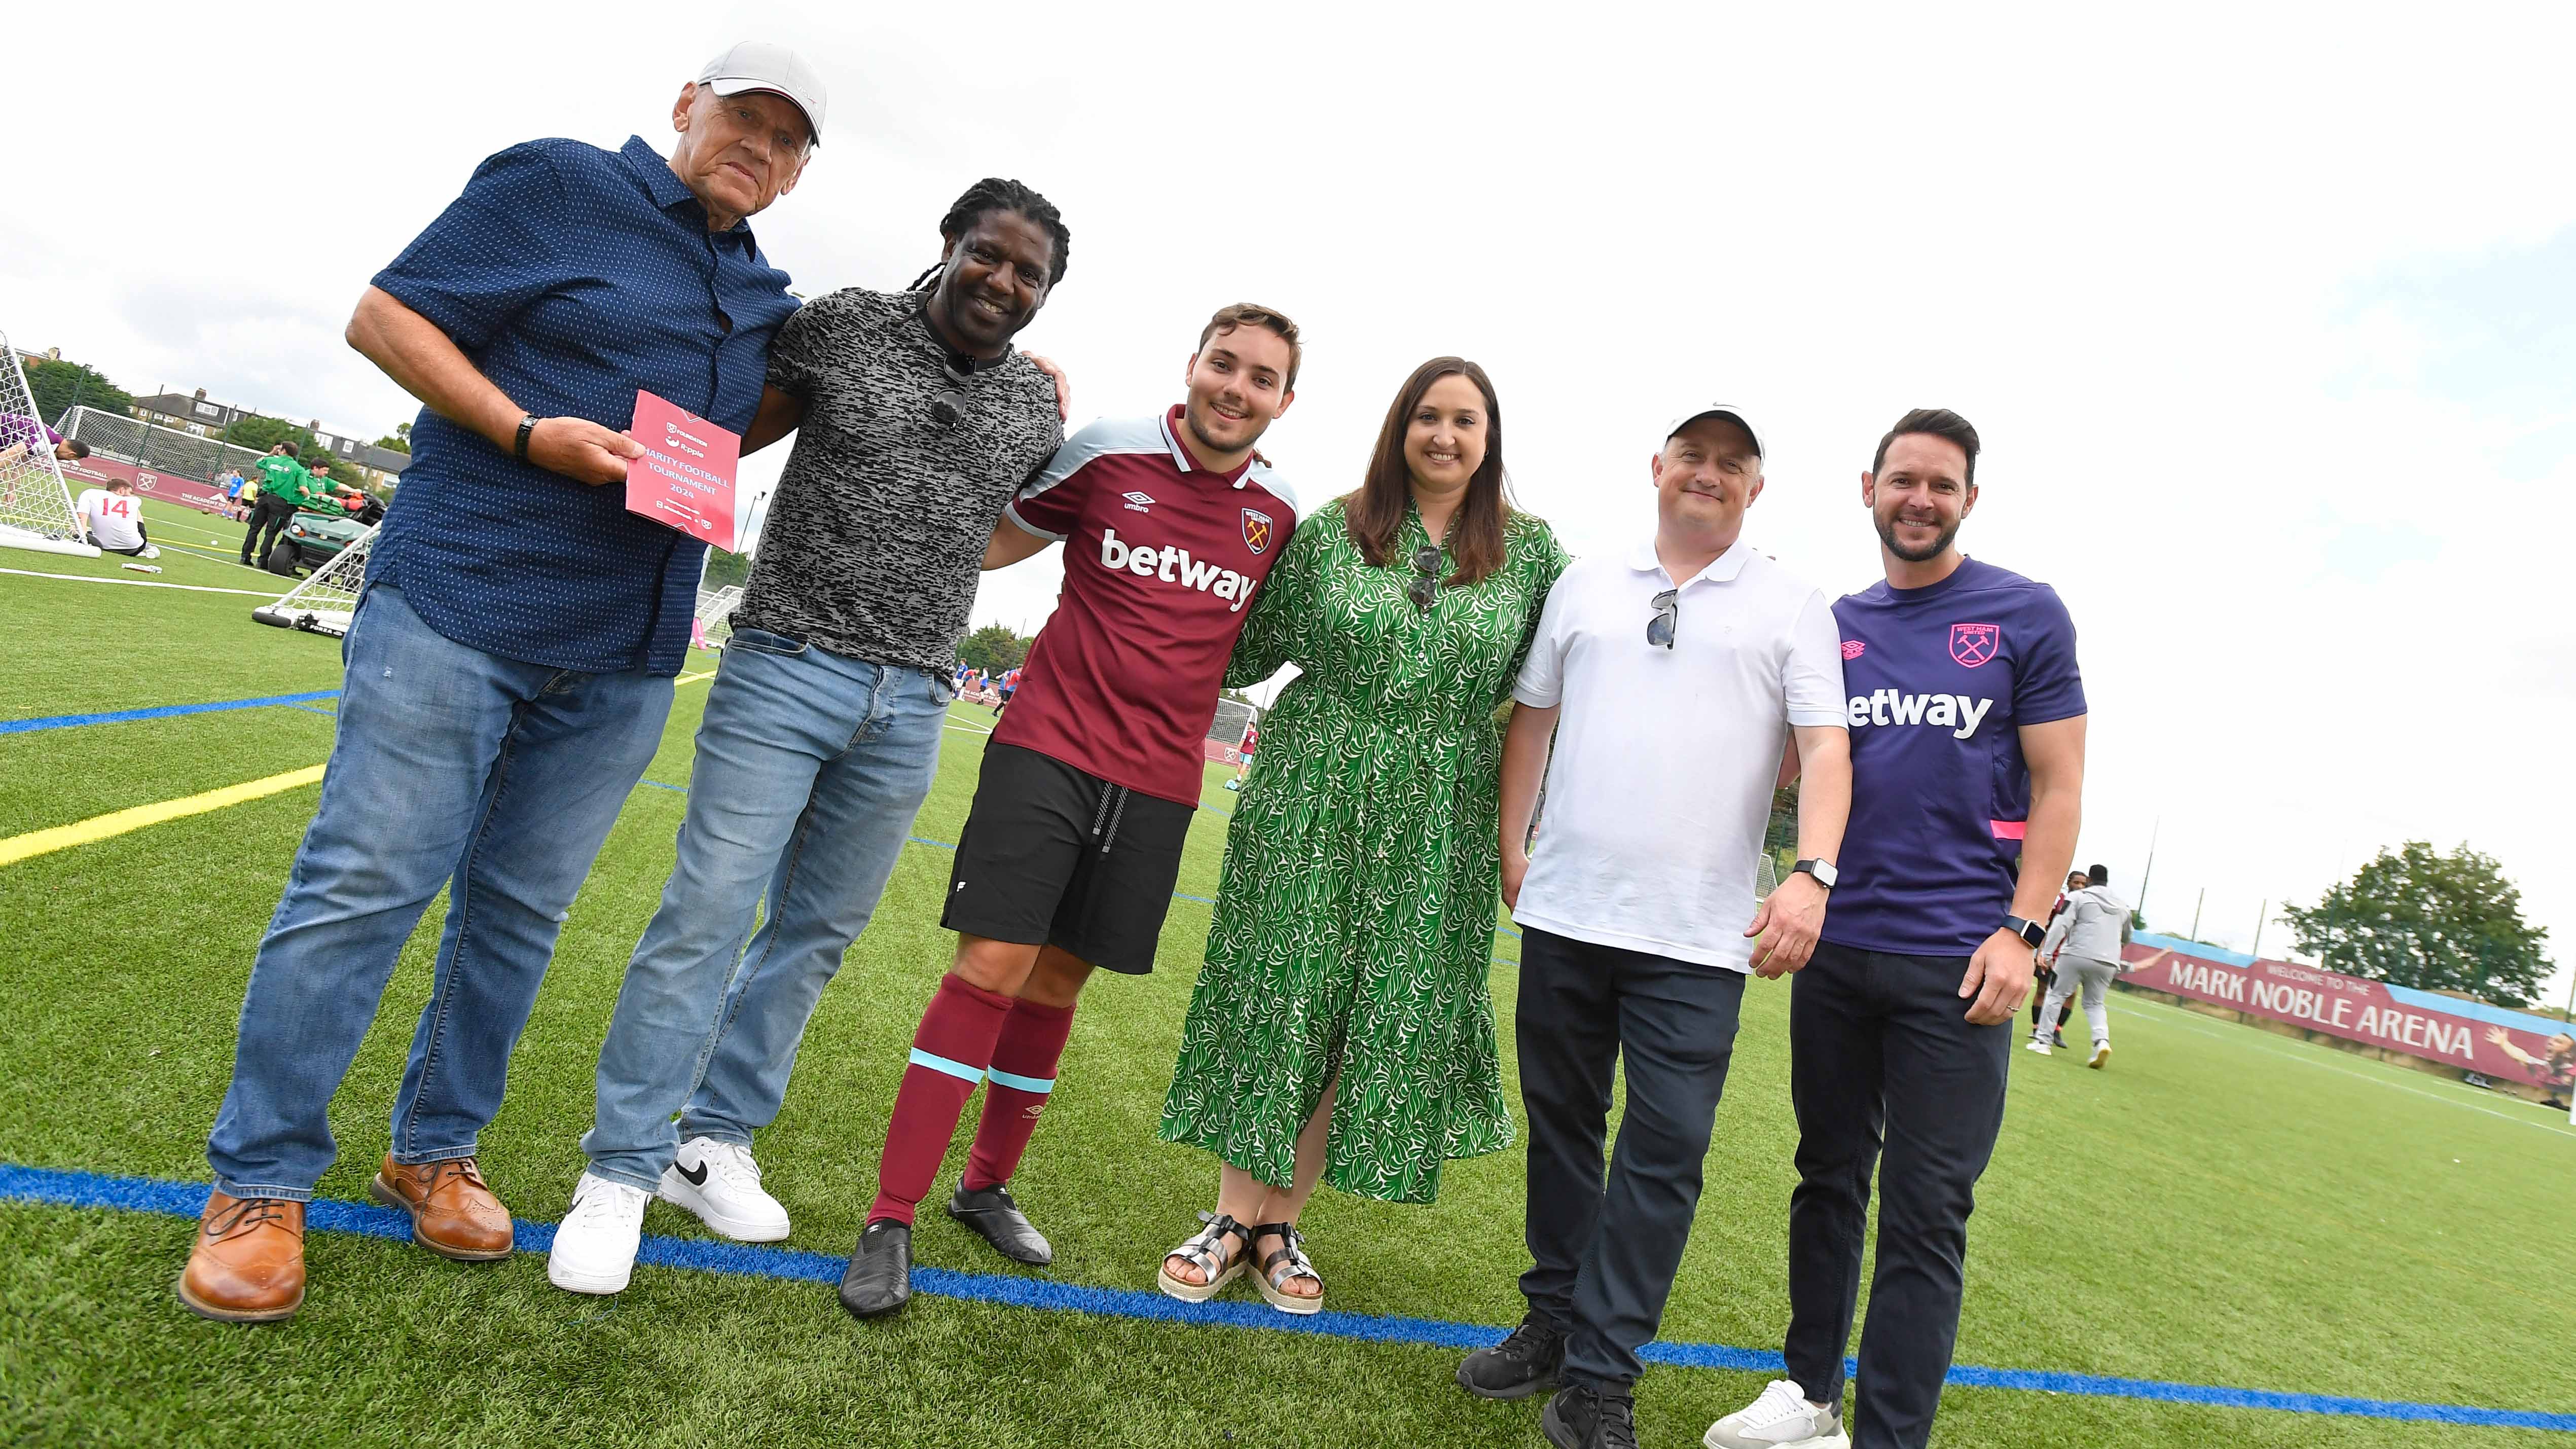 Alice Hendey poses with partners and West Ham players at Charity Tournament